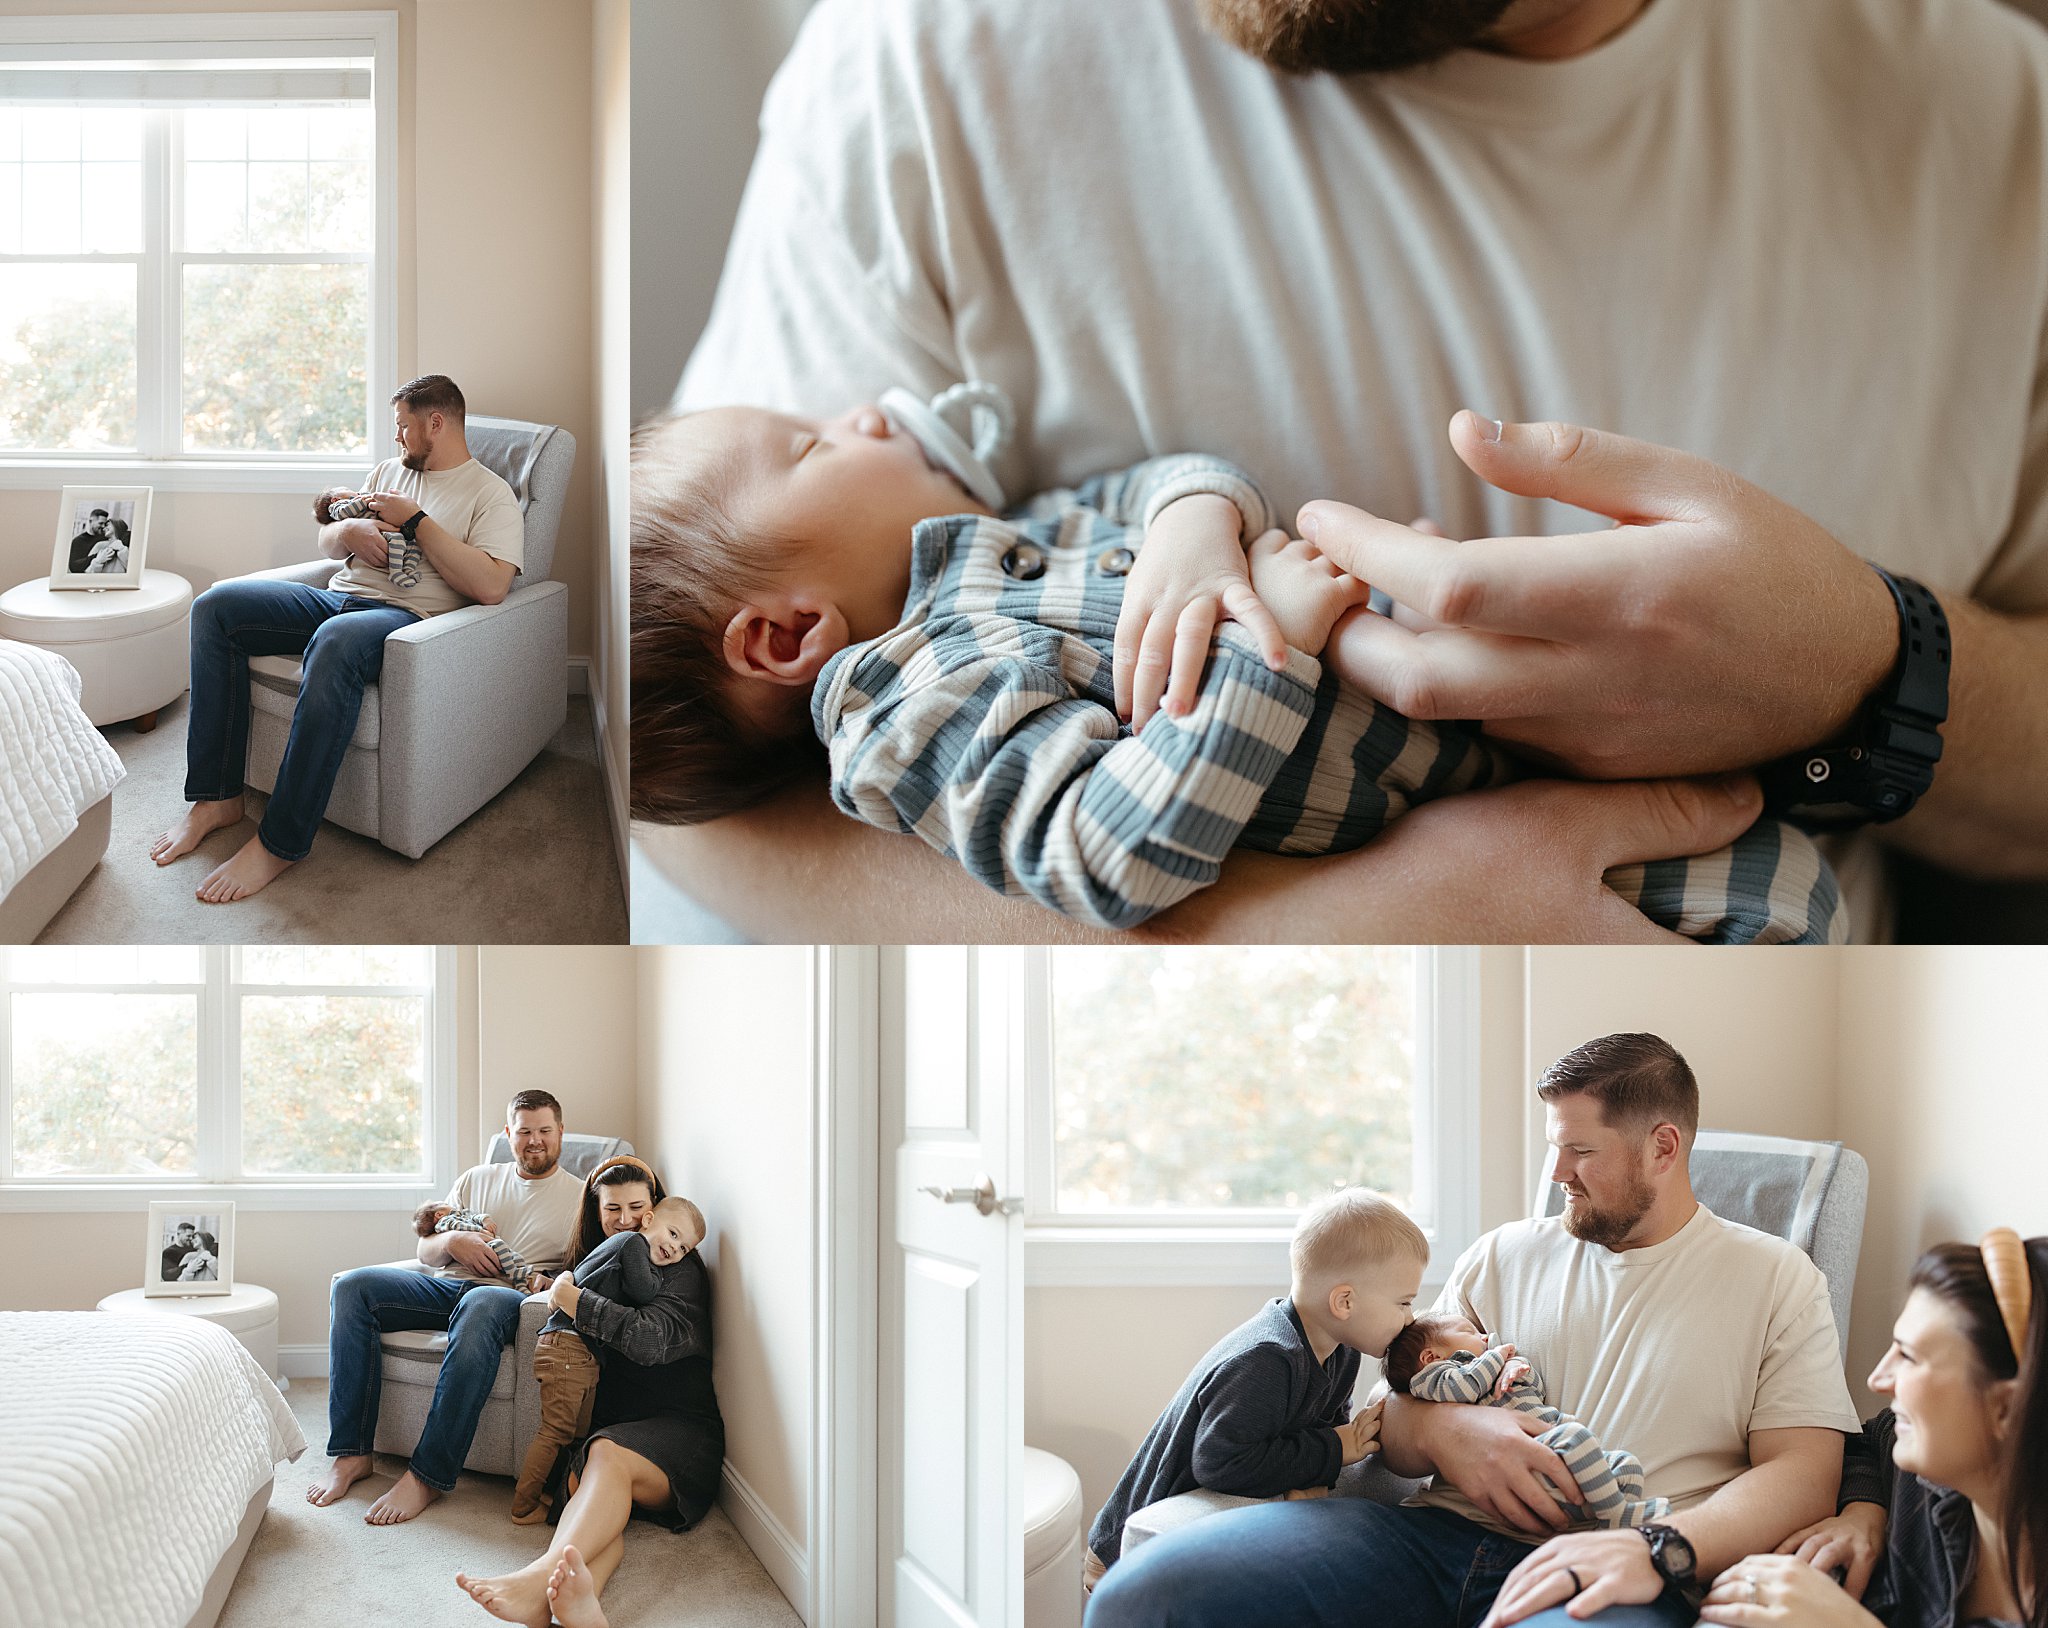 dad rocks new baby by bright window by Nikki Meer Photography